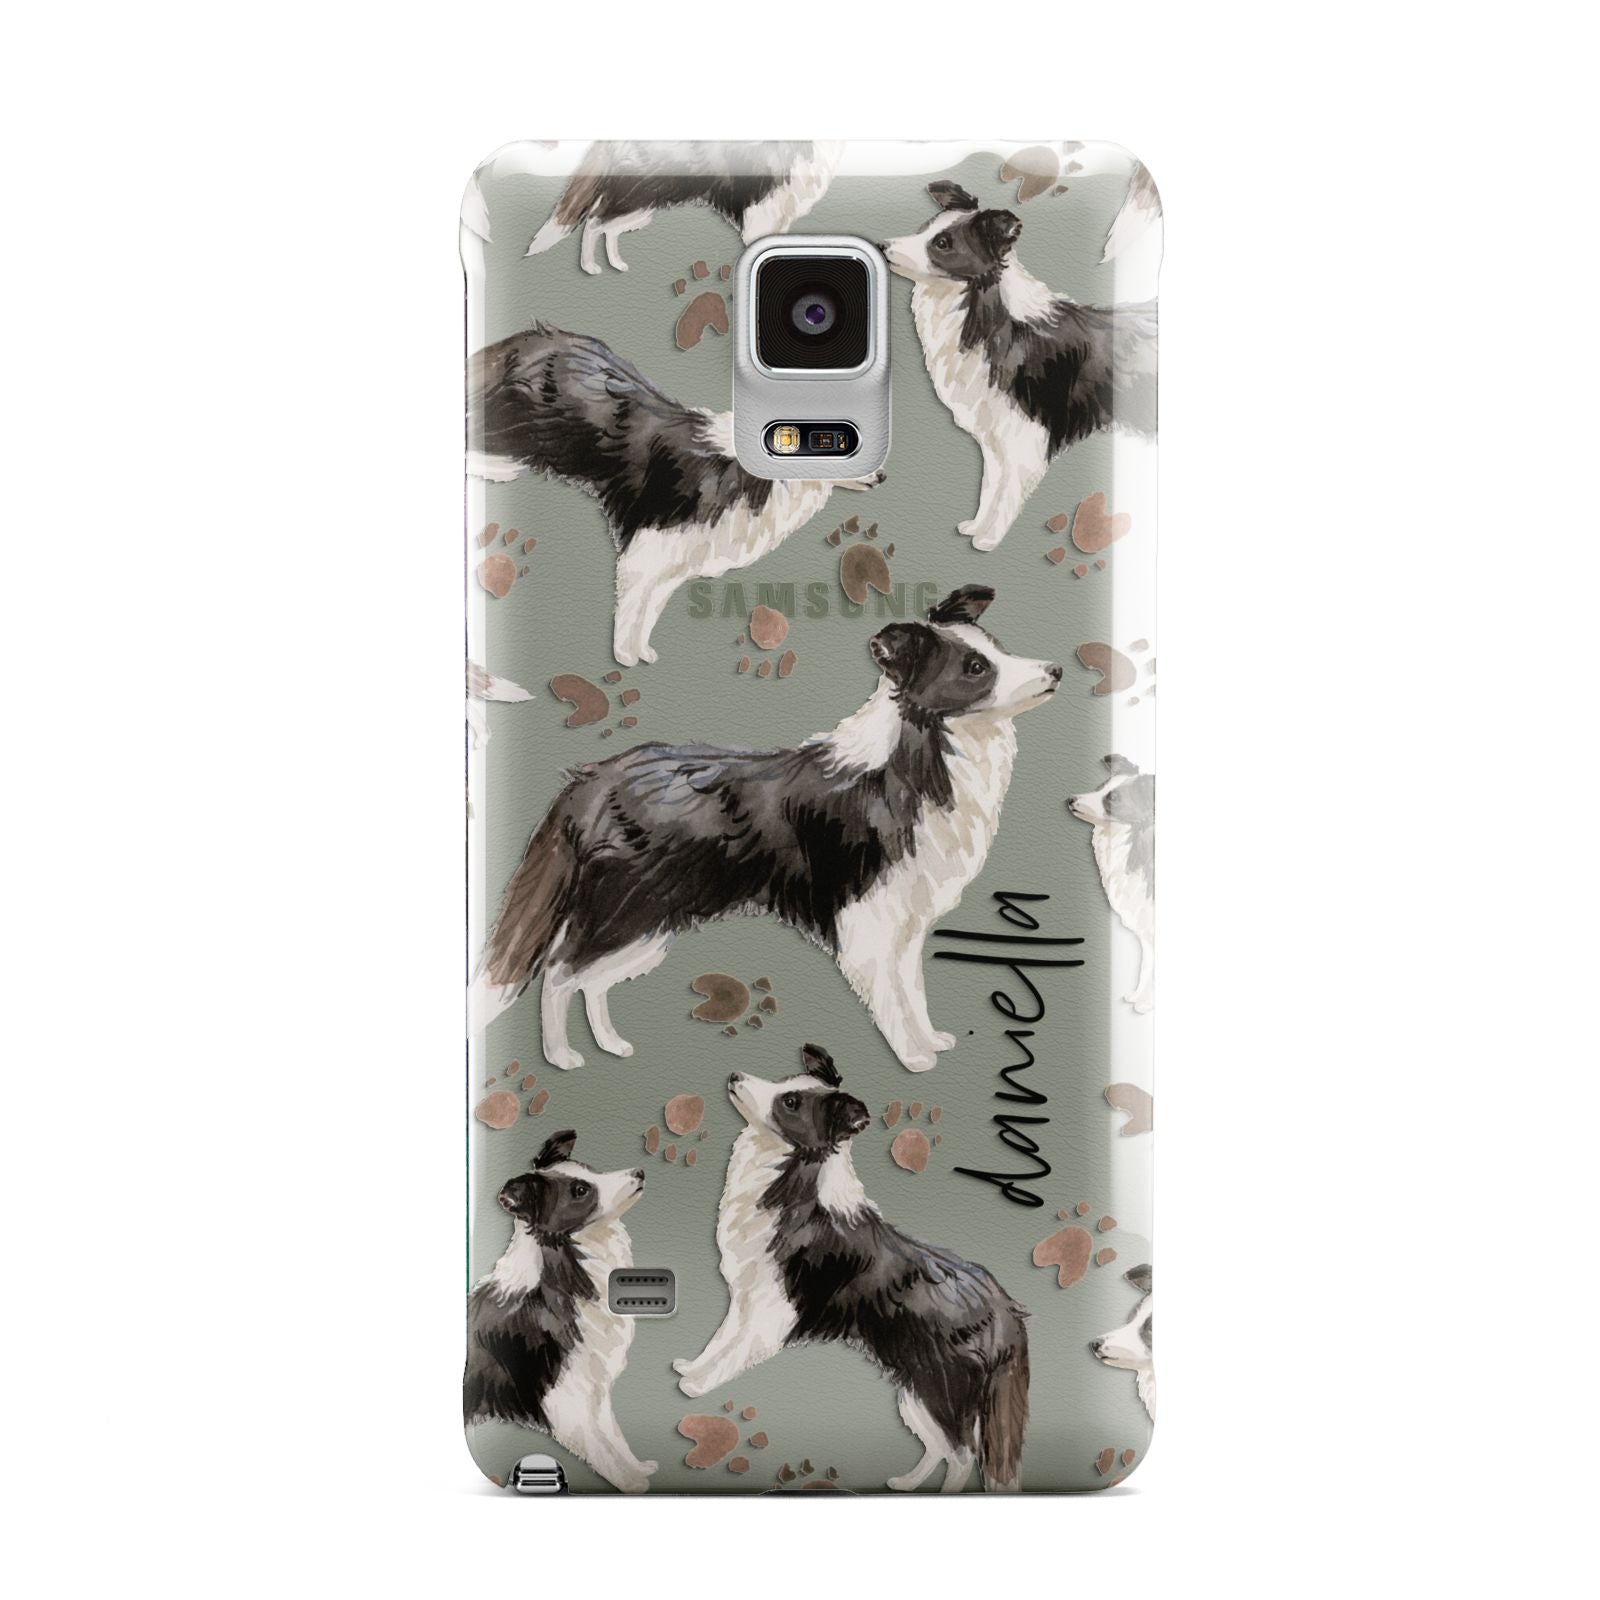 Personalised Border Collie Dog Samsung Galaxy Note 4 Case